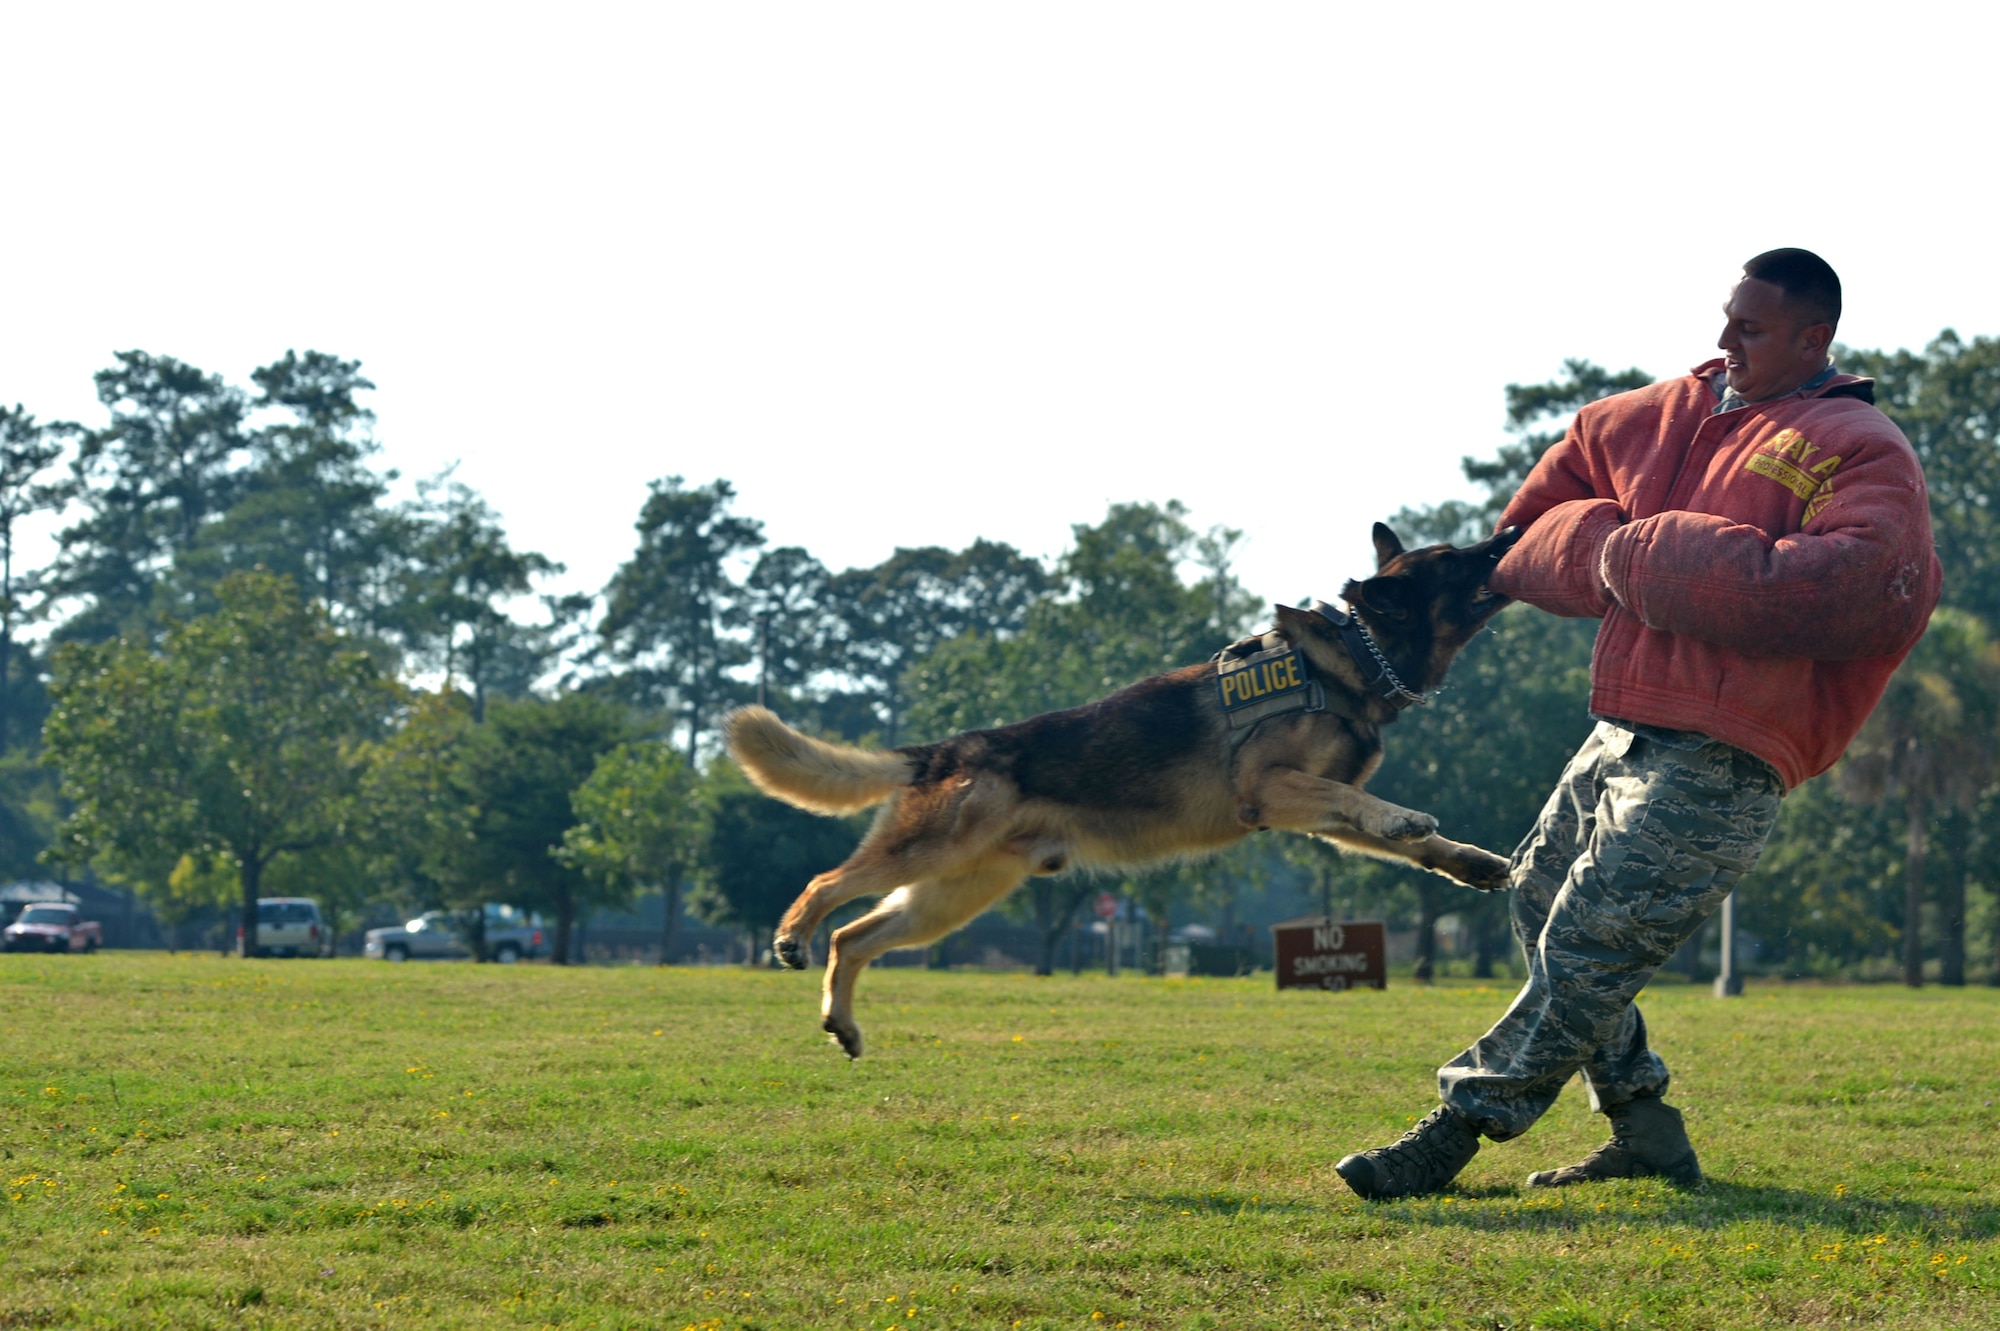 U.S. Air Force Staff Sgt. David Mussio, 20th Security Forces Squadron military working dog handler, performs a MWD demonstration during a “Defender for a Day” event at Shaw Air Force Base, S.C., Sept. 9, 2016. Airmen assigned to the 20th SFS showcased their duties for Jake Pritchard, 20th SFS honorary defender, and his family. (U.S. Air Force photo by Airman 1st Class Christopher Maldonado)